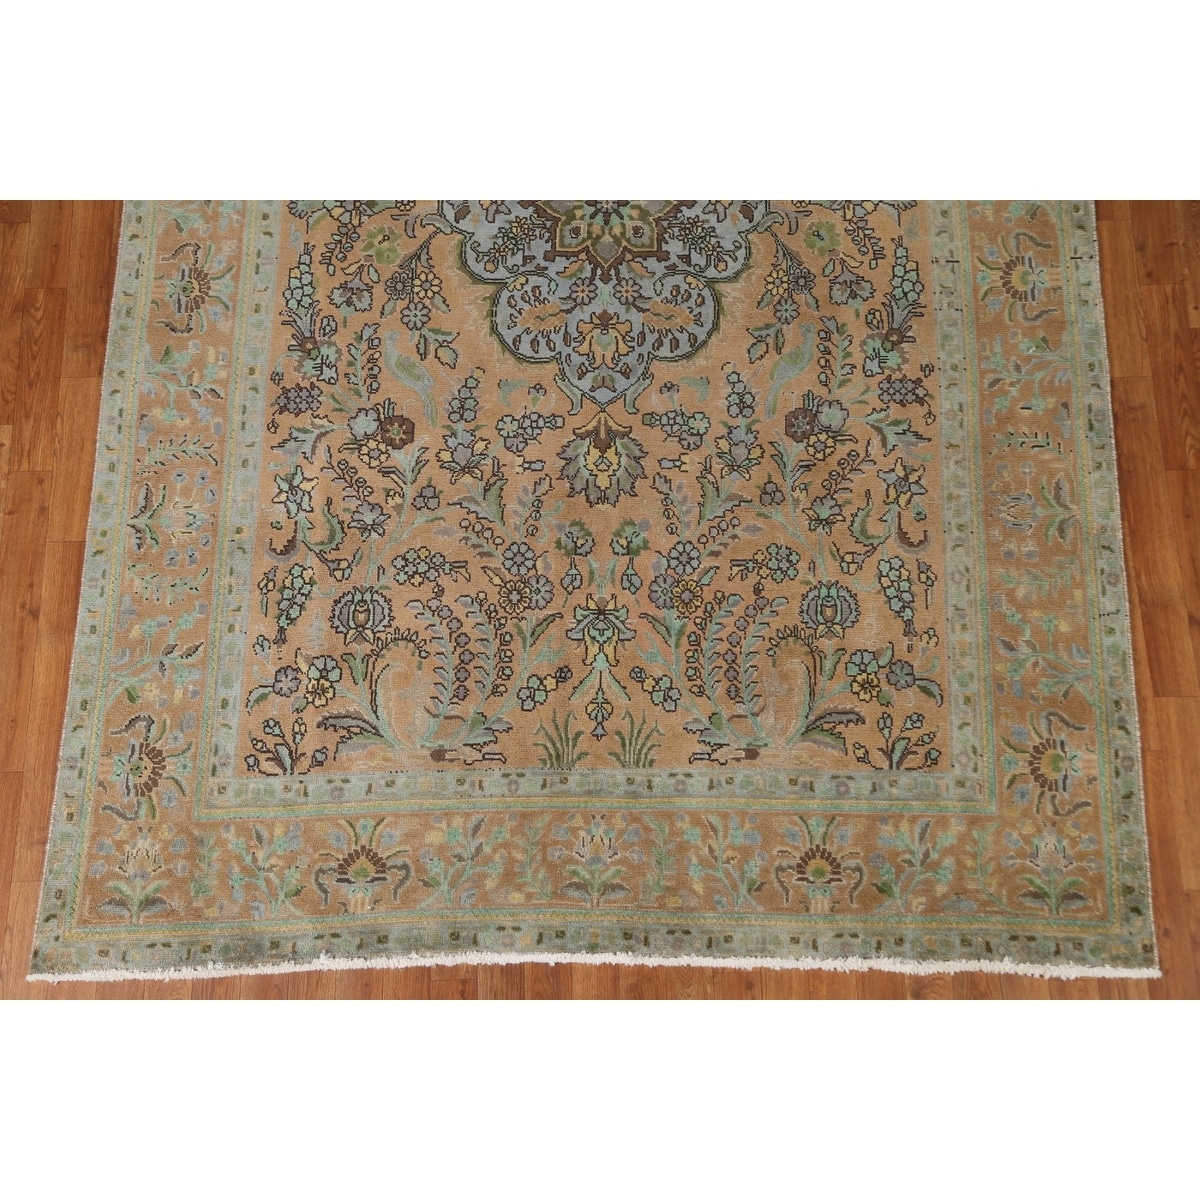 https://ak1.ostkcdn.com/images/products/is/images/direct/e6ba14c0fbec9f613b6deba3915058ded33a2743/Vintage-Over-dyed-Tabriz-Persian-Wool-Area-Rug-Hand-knotted.jpg